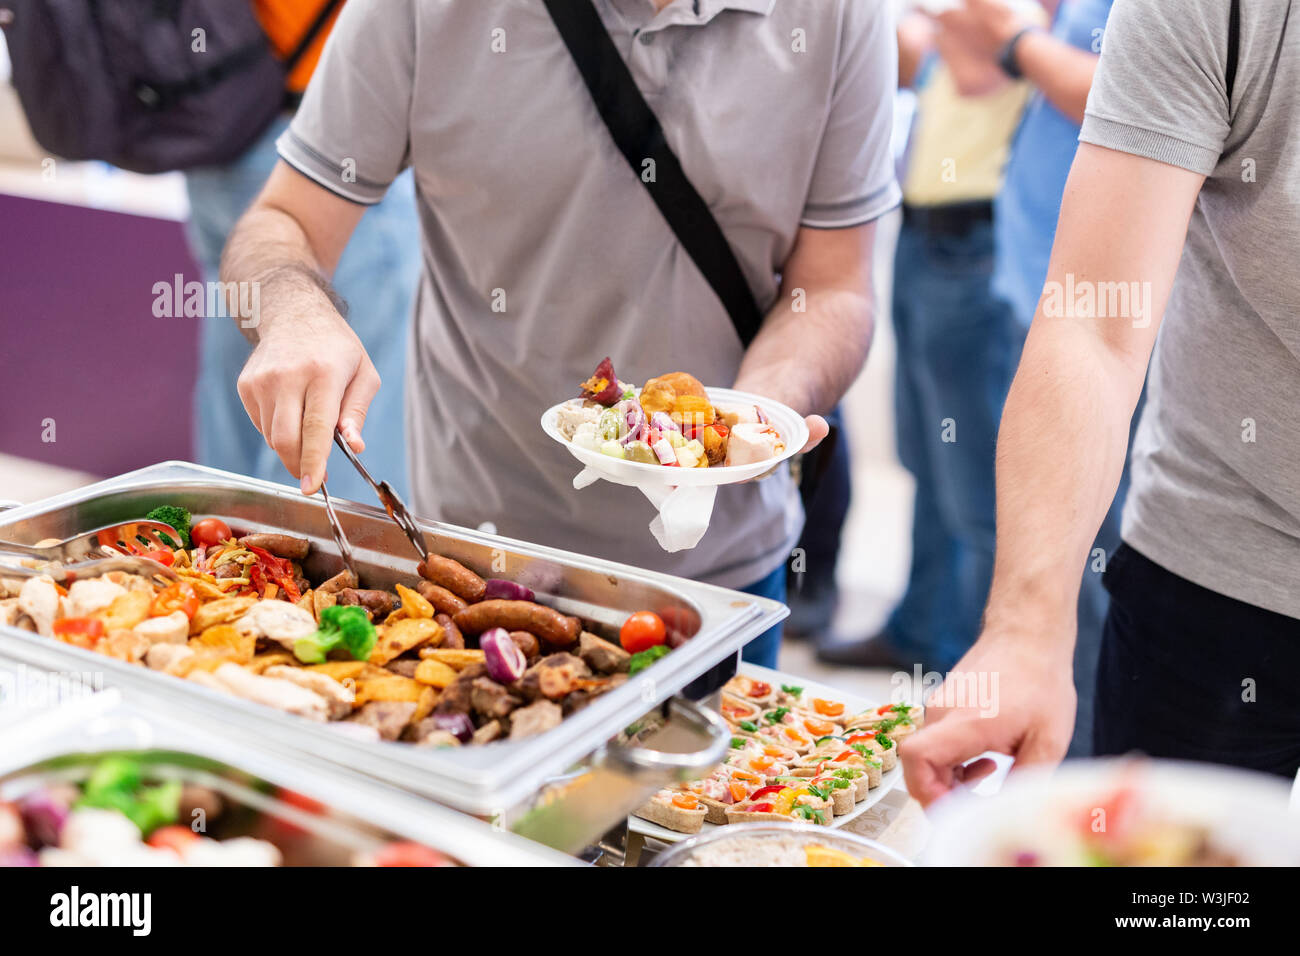 https://c8.alamy.com/comp/W3JF02/close-up-of-man-holding-plate-and-scooping-food-at-buffet-table-catering-in-hotel-or-restaurant-W3JF02.jpg